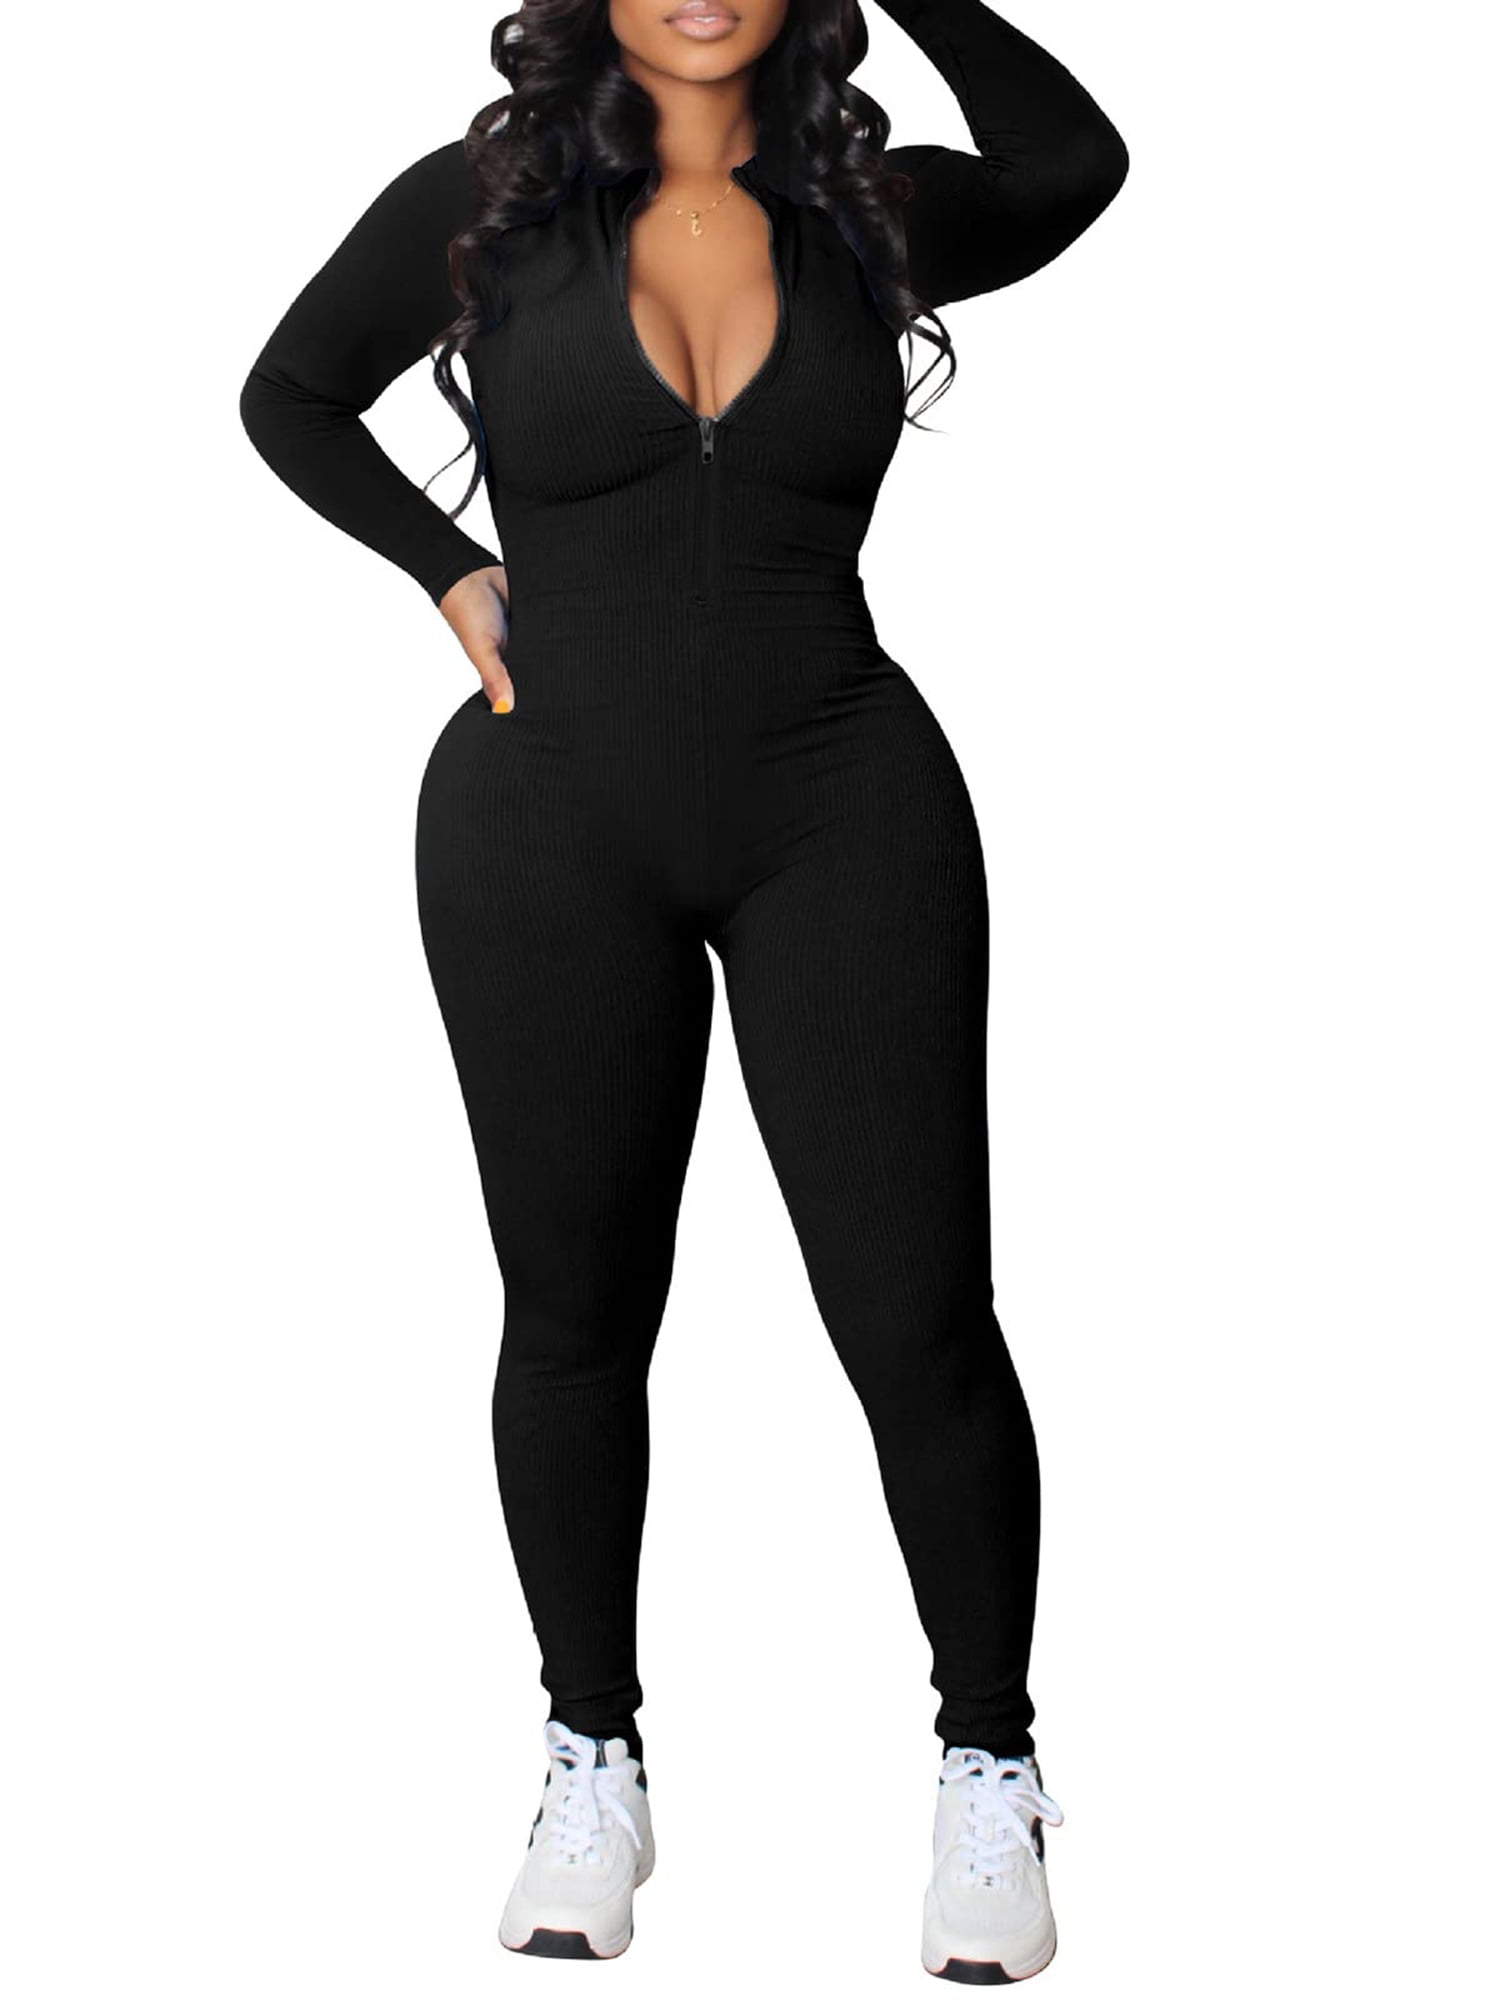 Sunisery Women Yoga Jumpsuit Workout Ribbed Long Sleeve Bodycon Jumpsuit  Sport Club Sexy One Piece Outfit Romper S/M/L/XL 